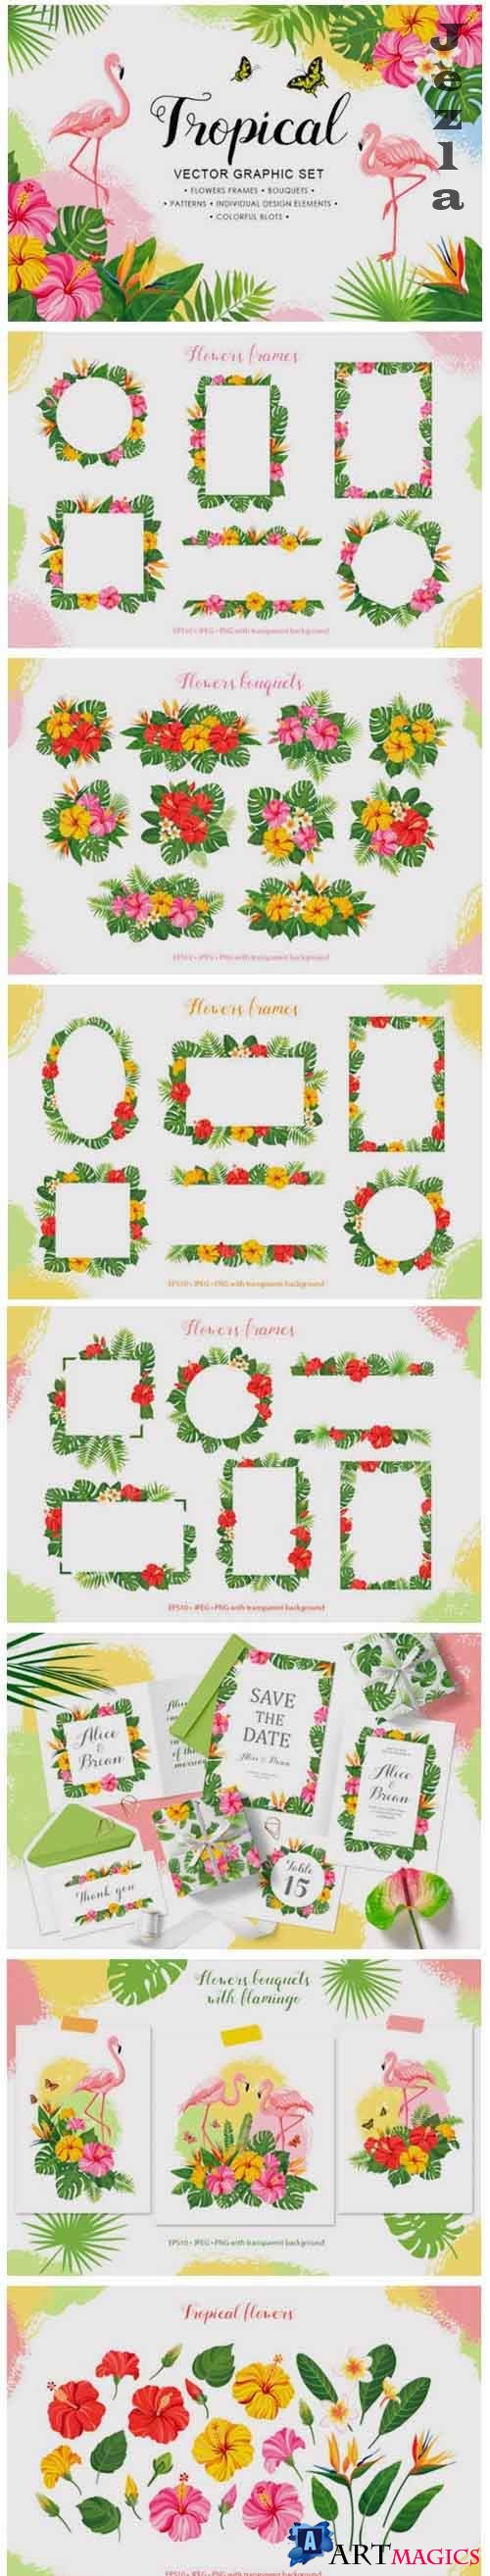 Tropical vector graphic set - 704337